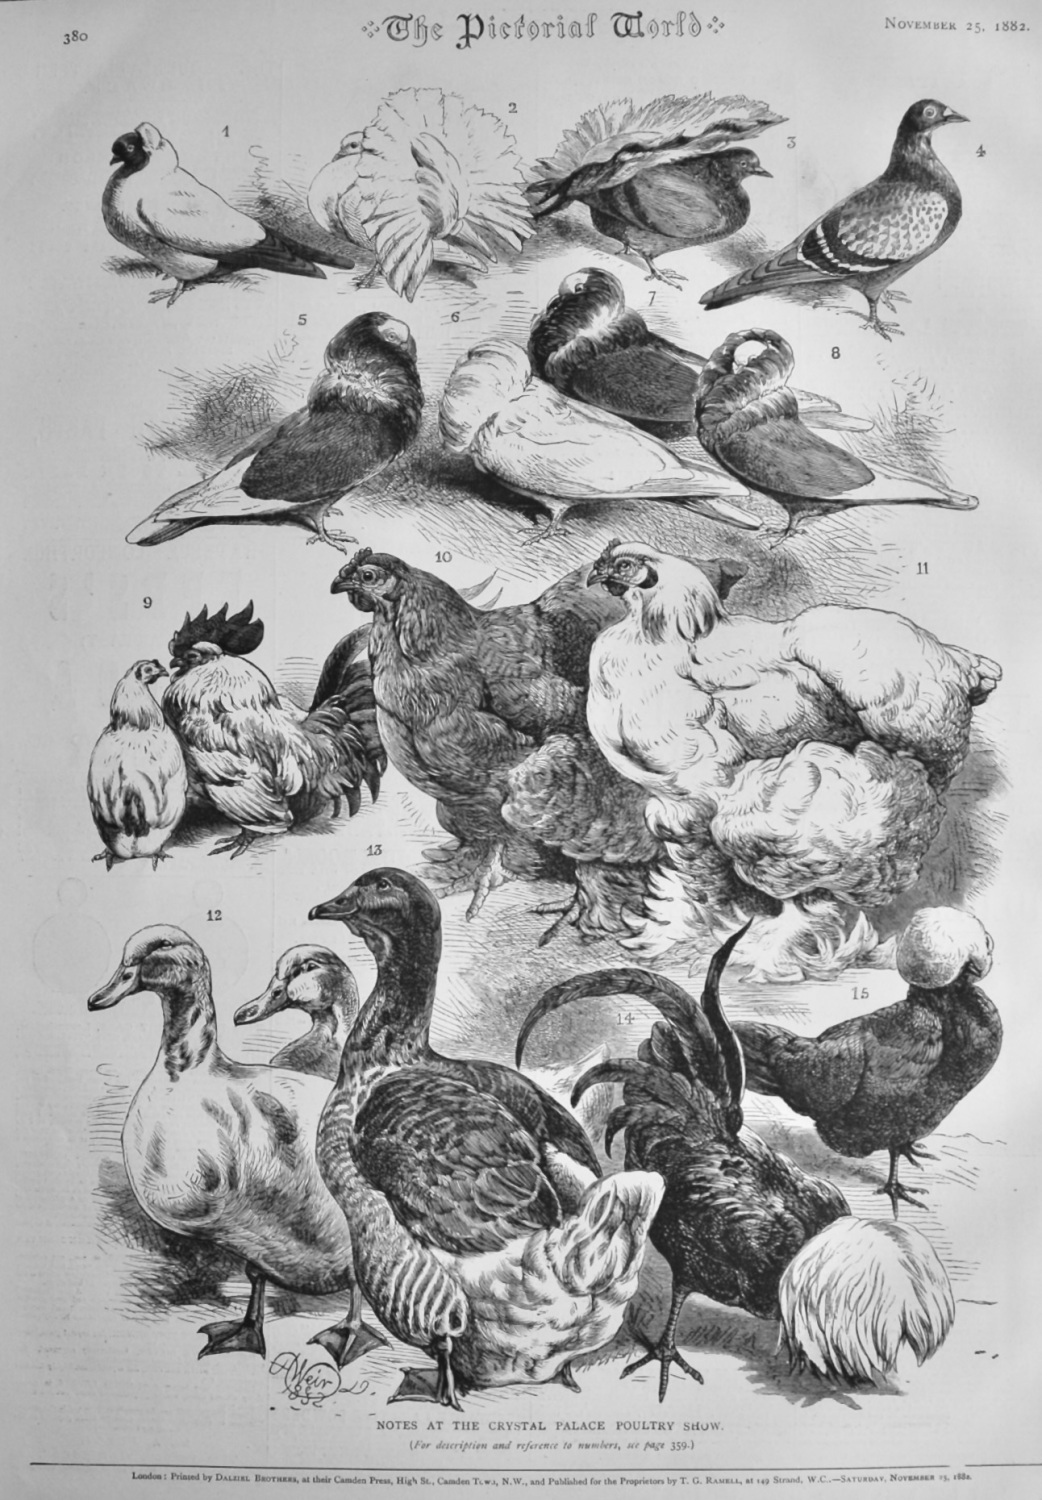 Notes at the Crystal Palace Poultry Show.  1882.